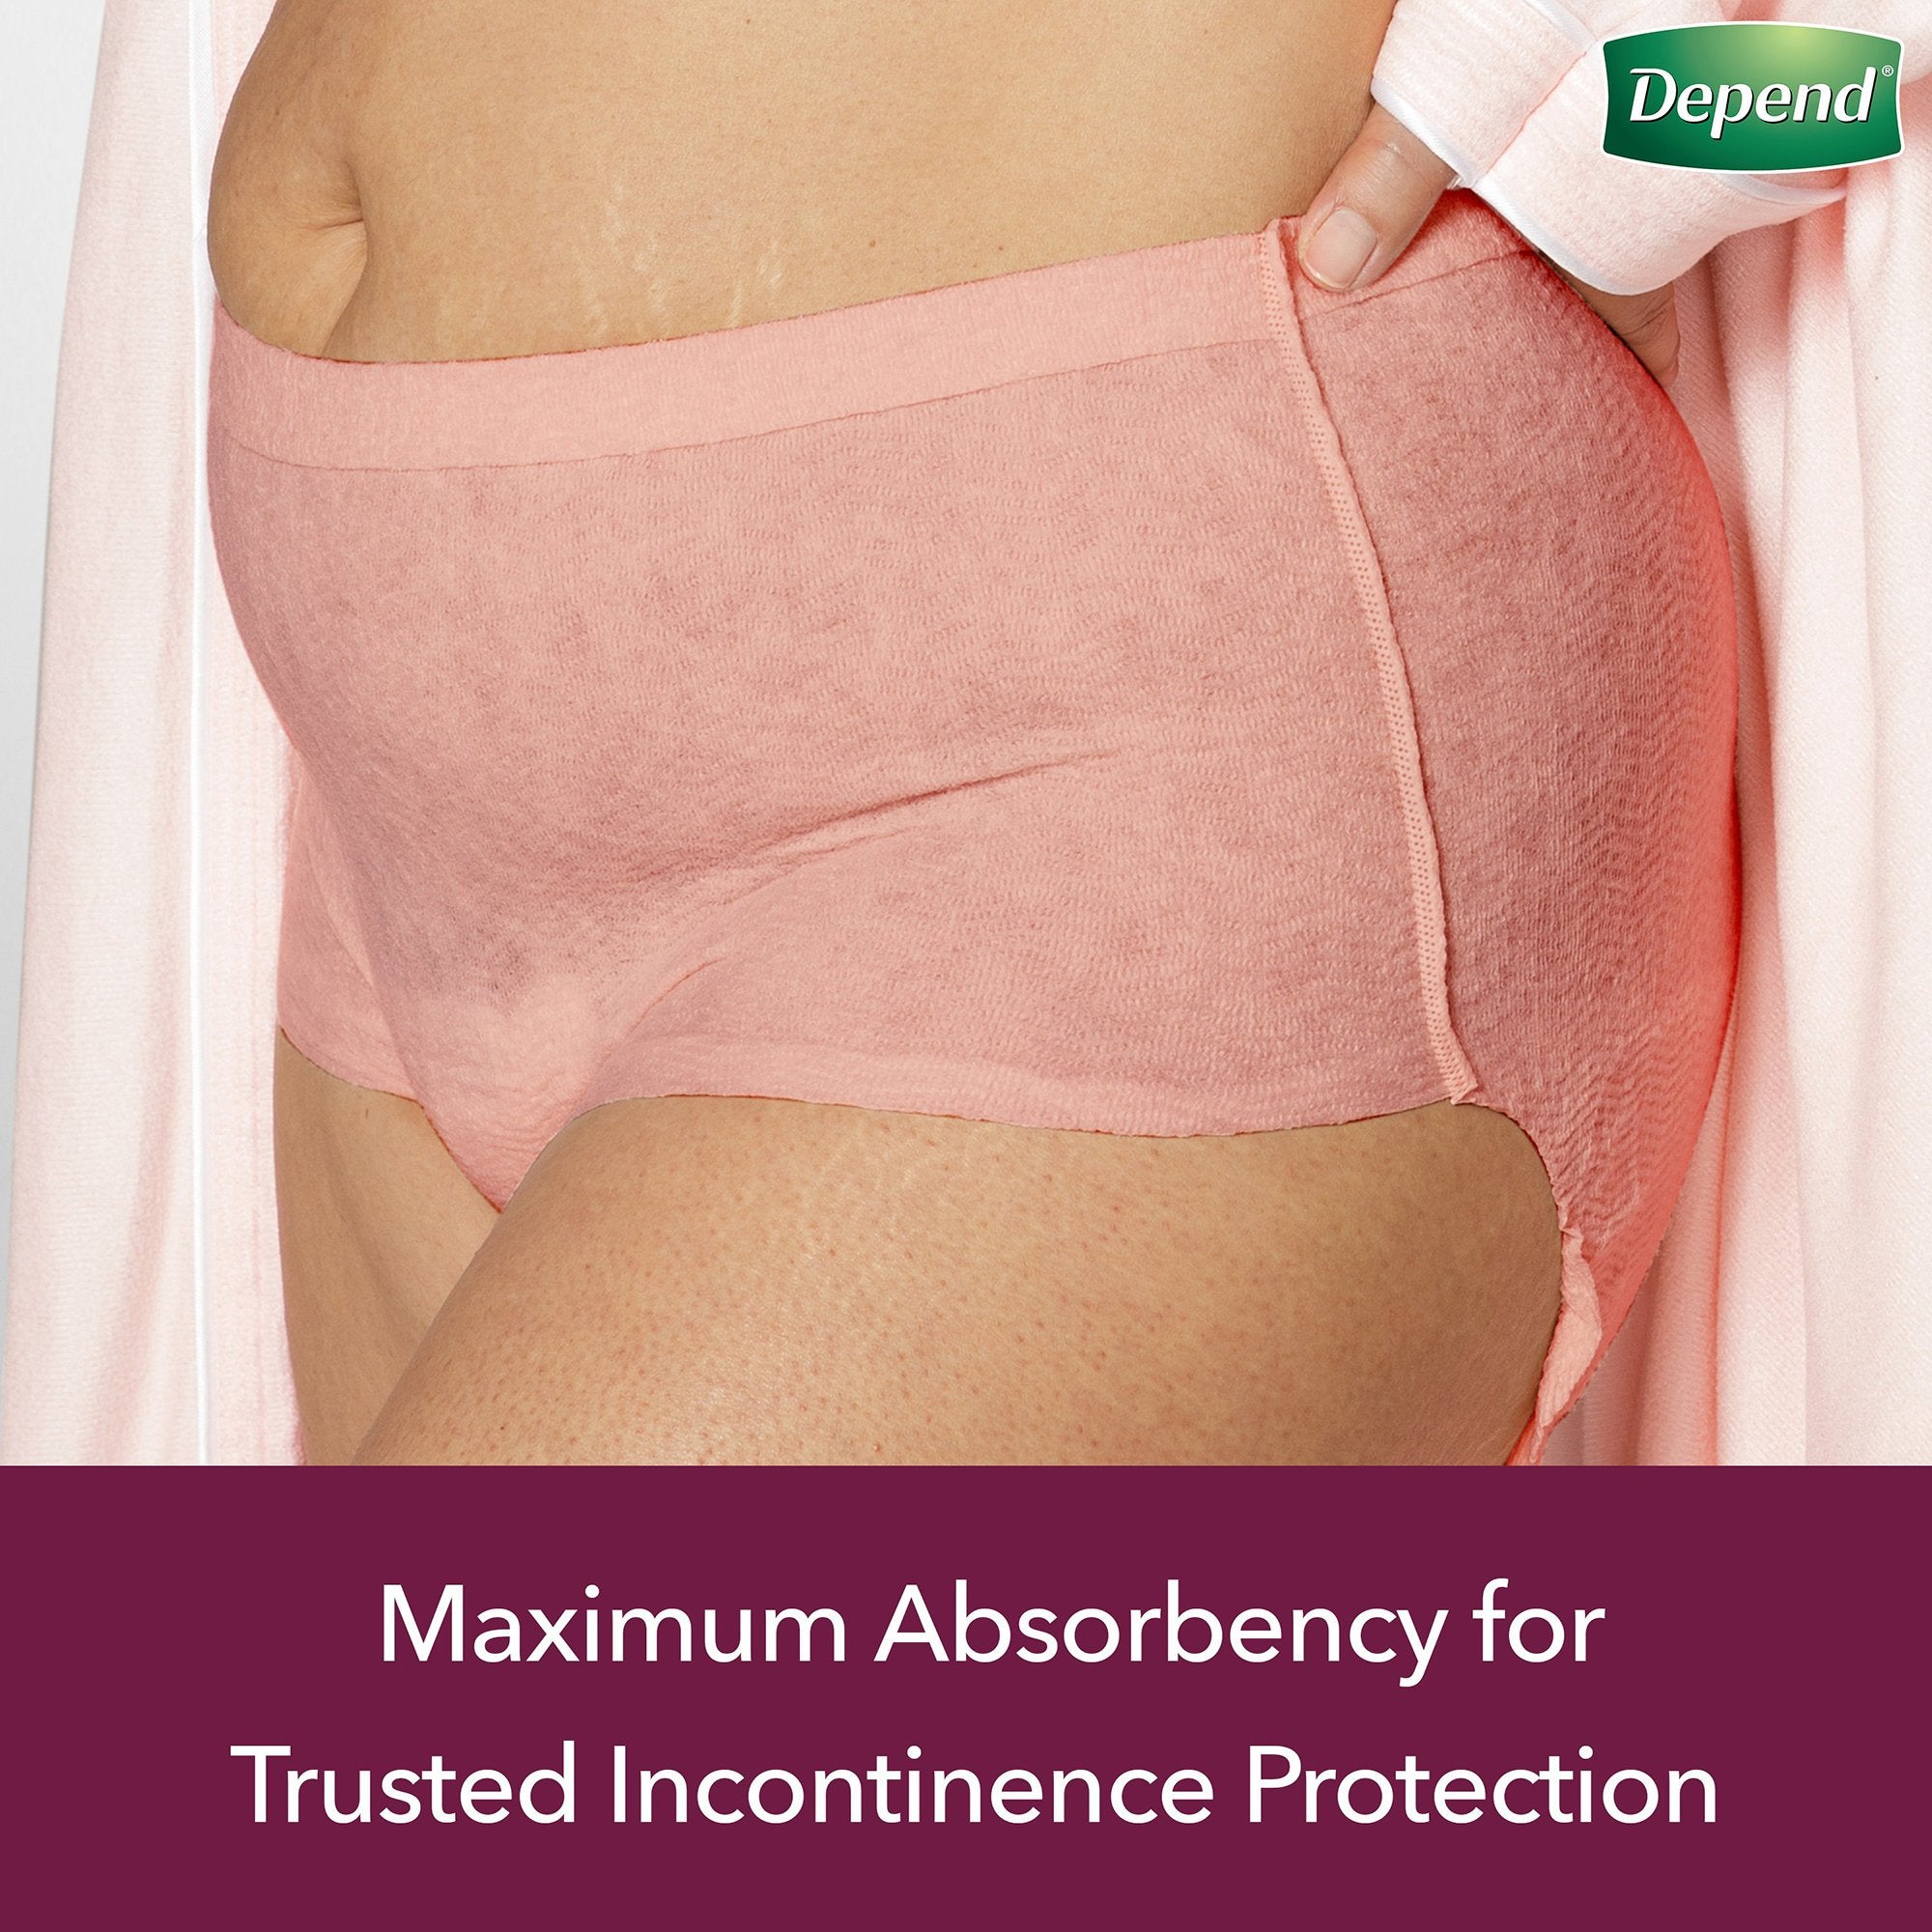 Depend FIT-FLEX Disposable Underwear Female Pull On with Tear Away